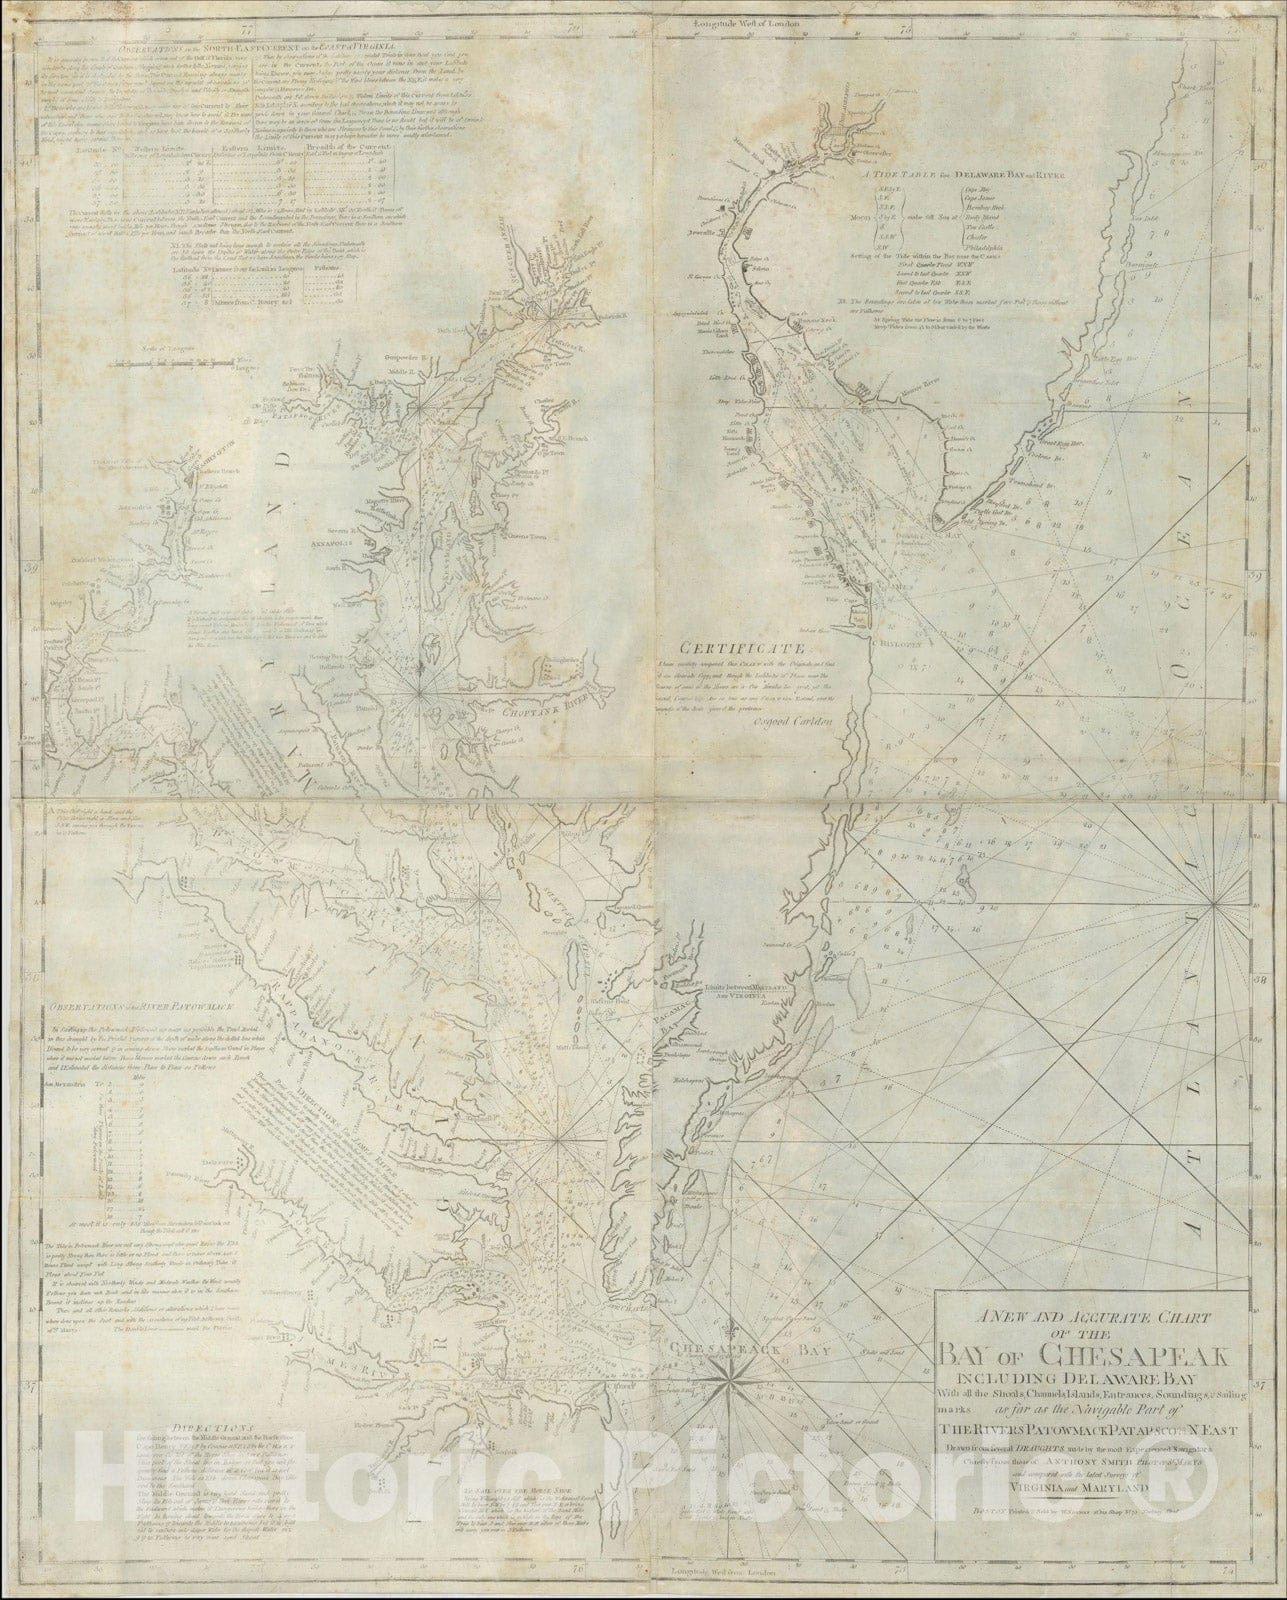 Historic Map : A New and Accurate Chart of the Bay of Chesapeak Including Delaware Bay With all the Shoals, Channels, Islands, Entrances, Soundings, 1799, Vintage Wall Art